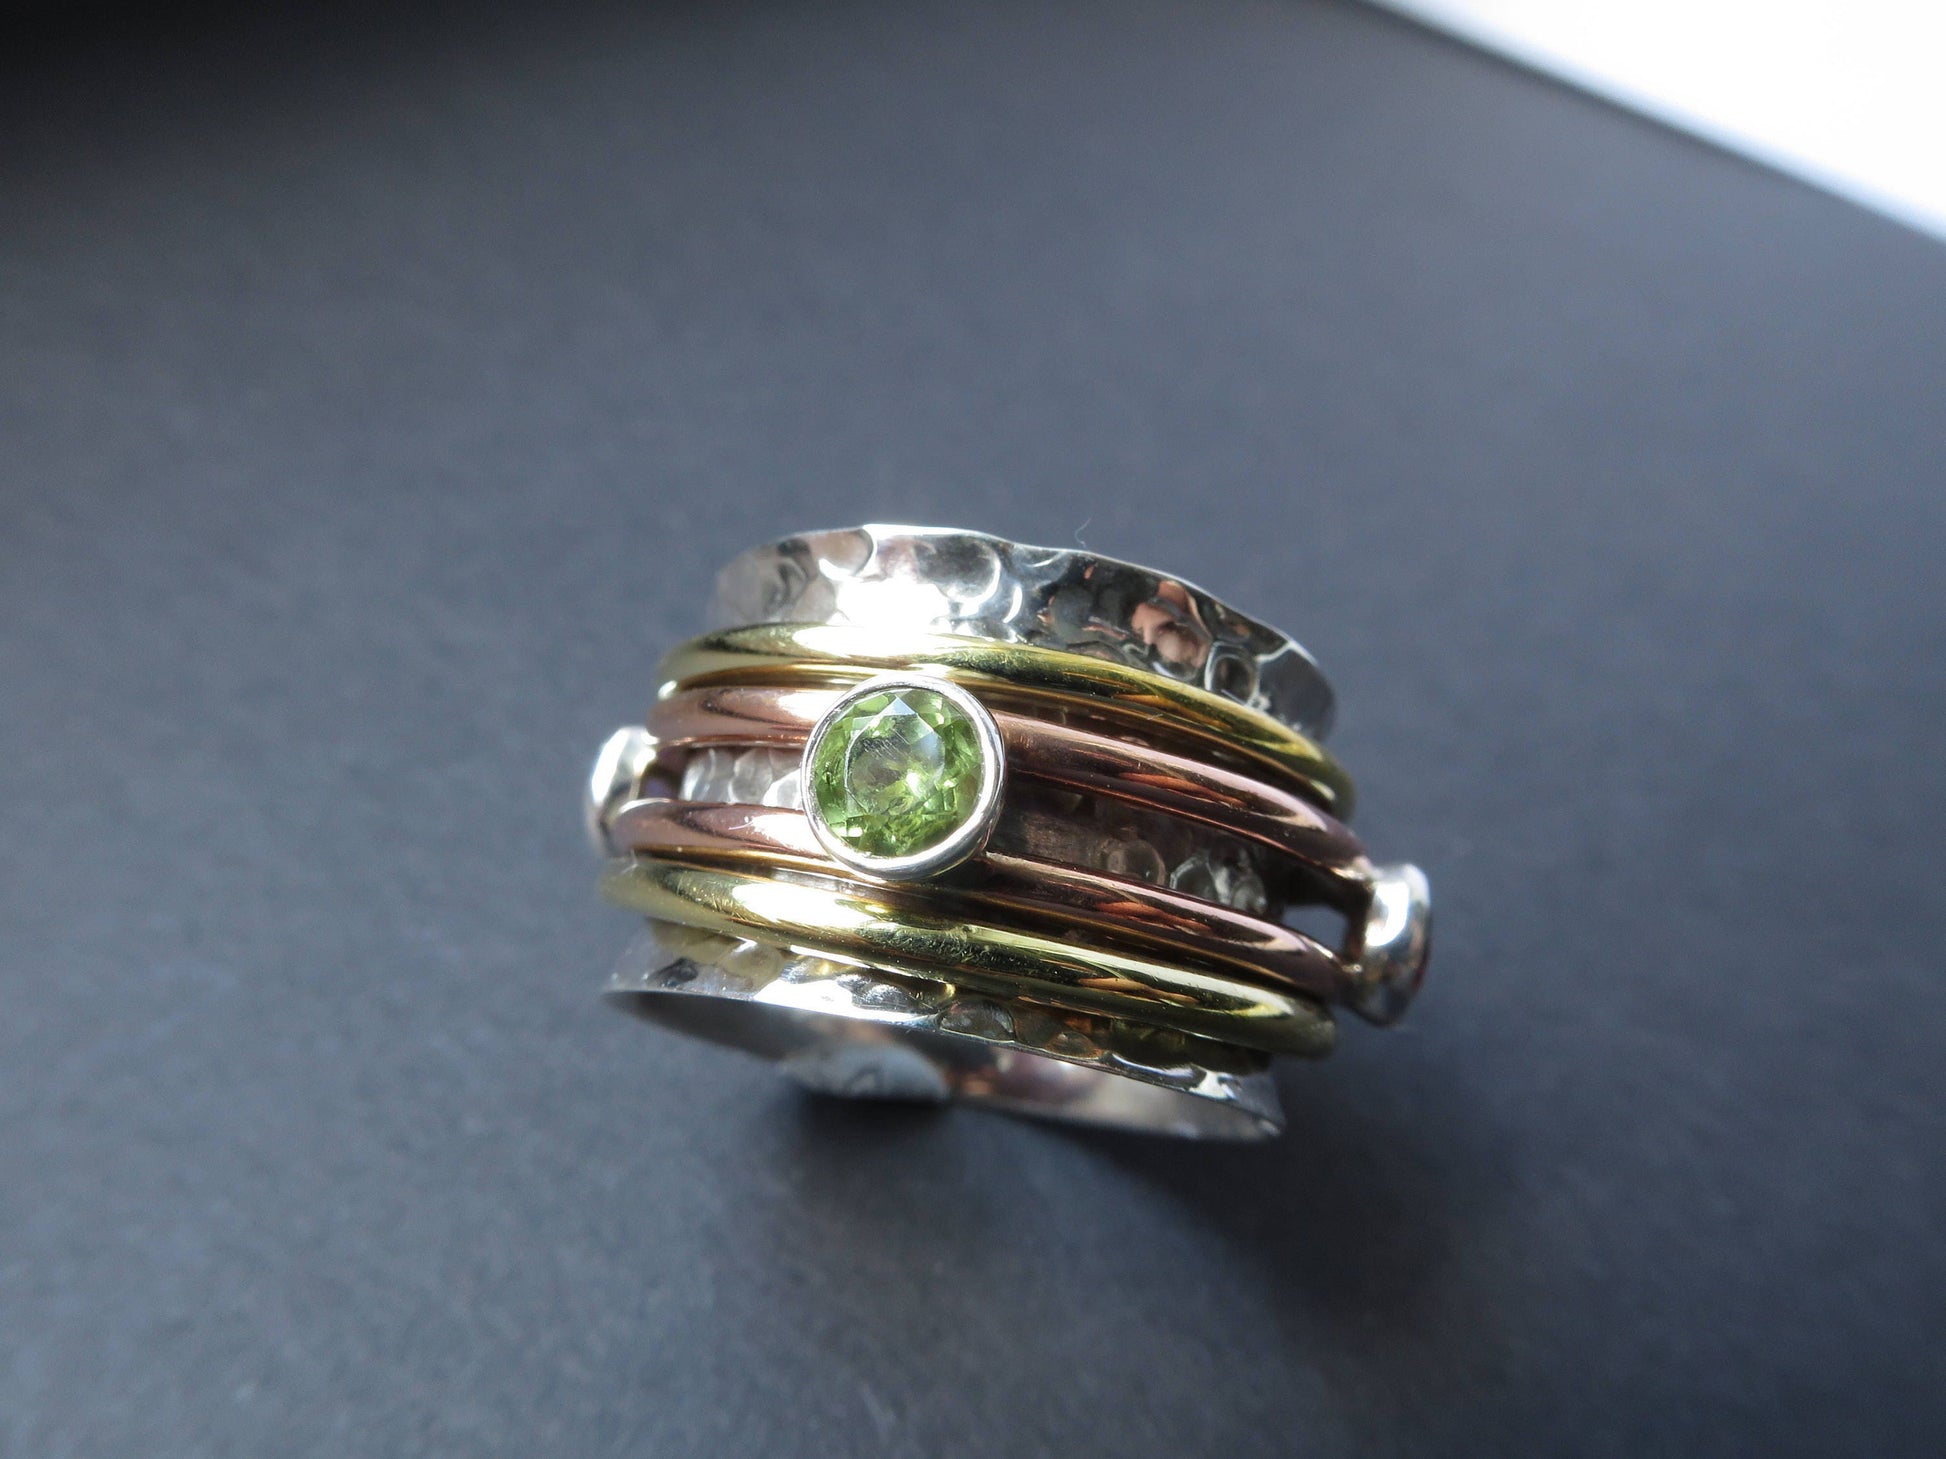 Spinner Ring Meditation Ring Mix Peridot Garnet Citrine Worry ring Unisex Size 9 925 Sterling silver faceted colorful natural gemstones